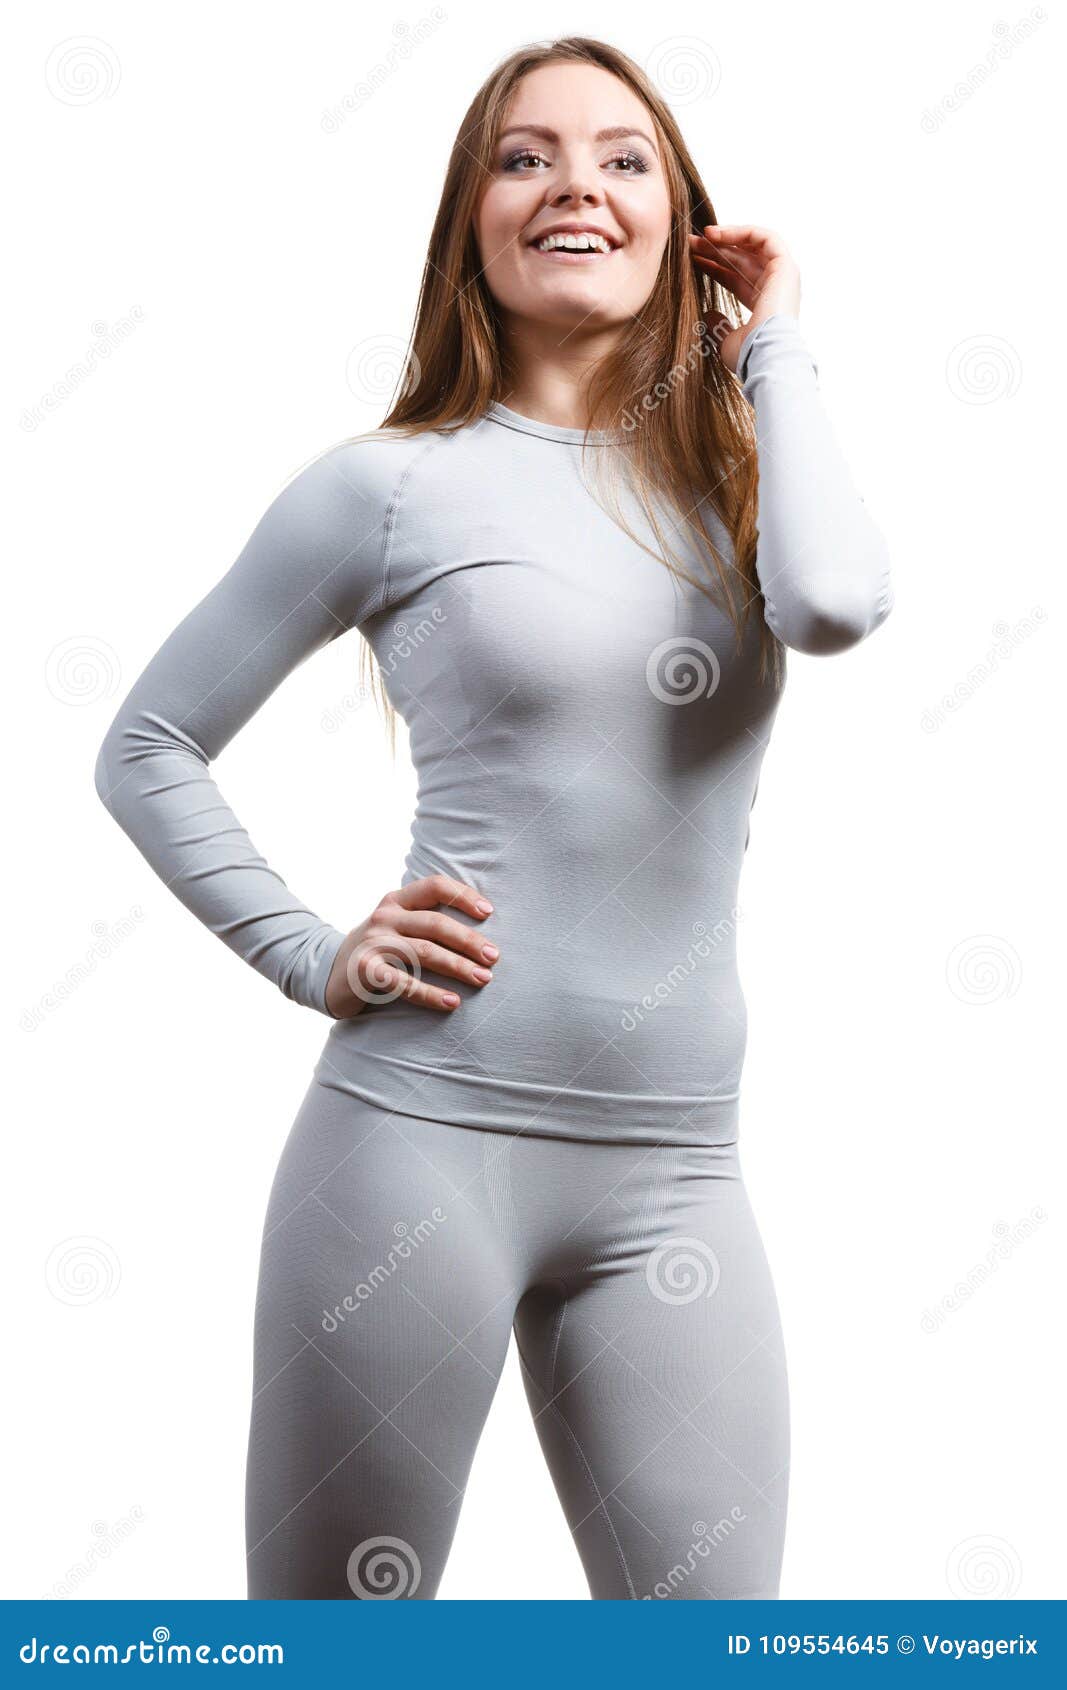 Clothing Fashion Sport Concept. Sporty Woman Wearing Thermoactive Underwear.  Attractive Sporty Lady Promoting Clothes And Showing Her Slim Abdomen.  Banco de Imagens Royalty Free, Ilustrações, Imagens e Banco de Imagens.  Image 86494099.